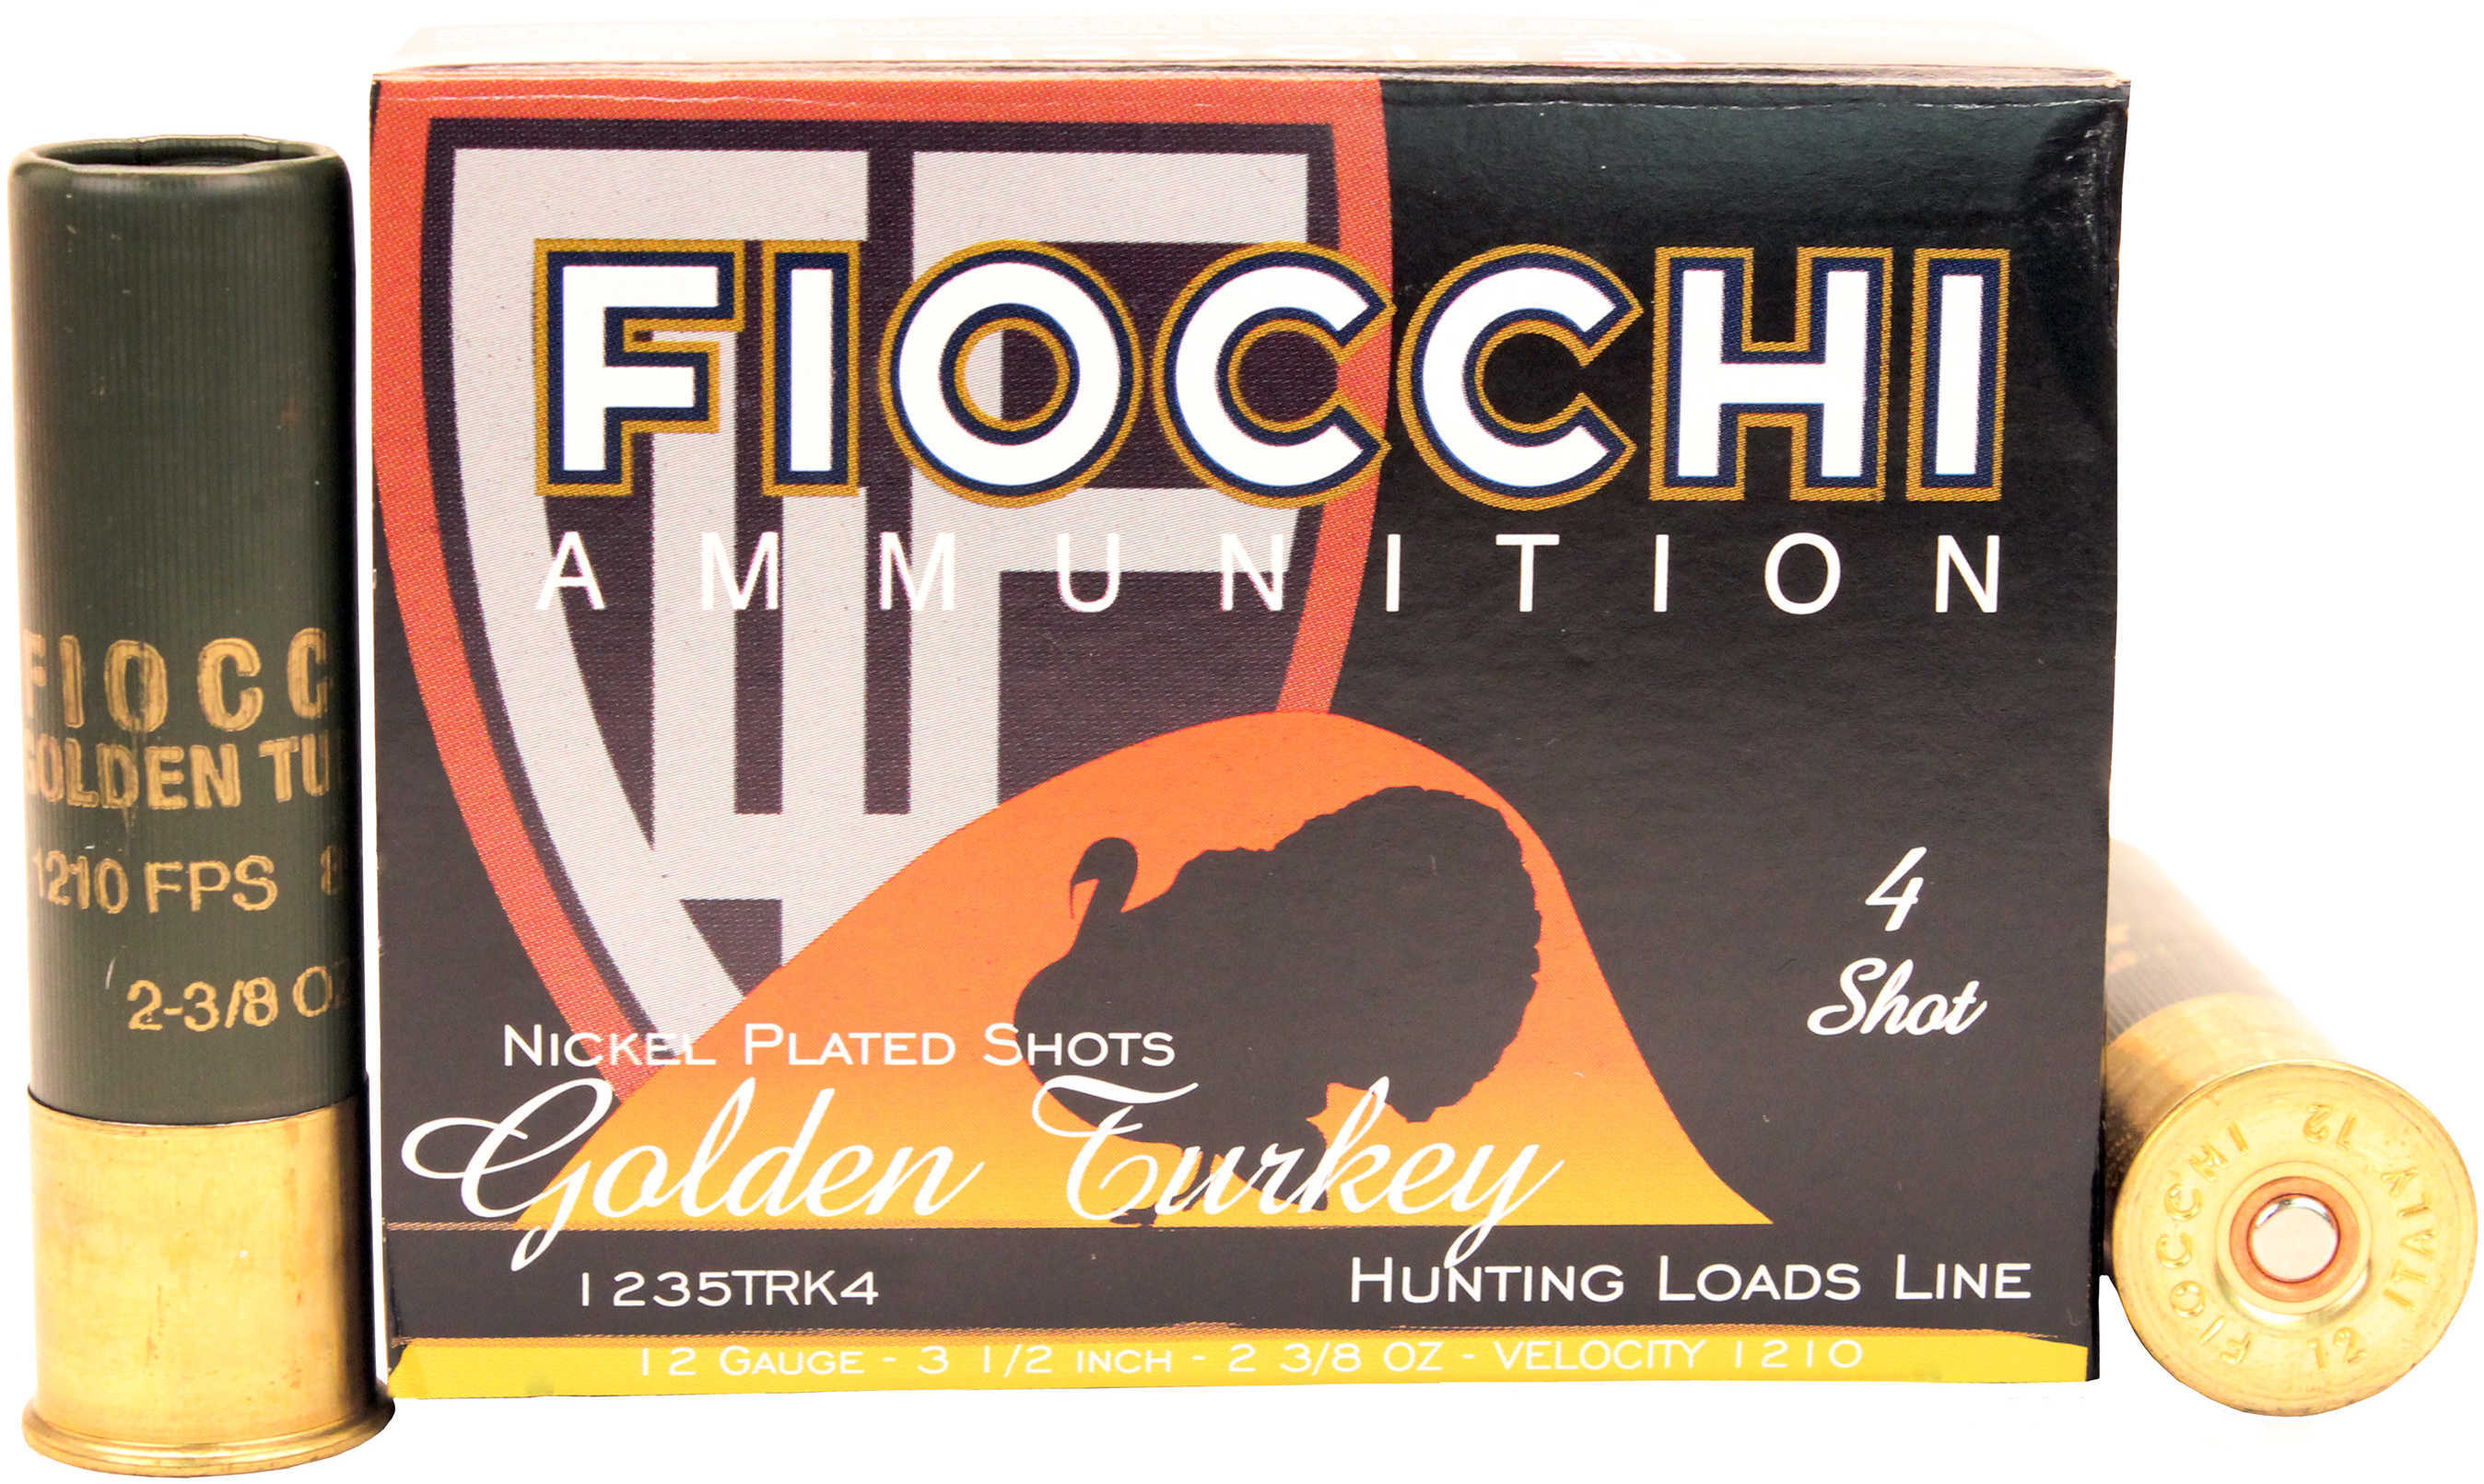 12 Gauge 10 Rounds Ammunition Fiocchi Ammo 3 1/2" 2 3/8 oz Nickel-Plated Lead #4